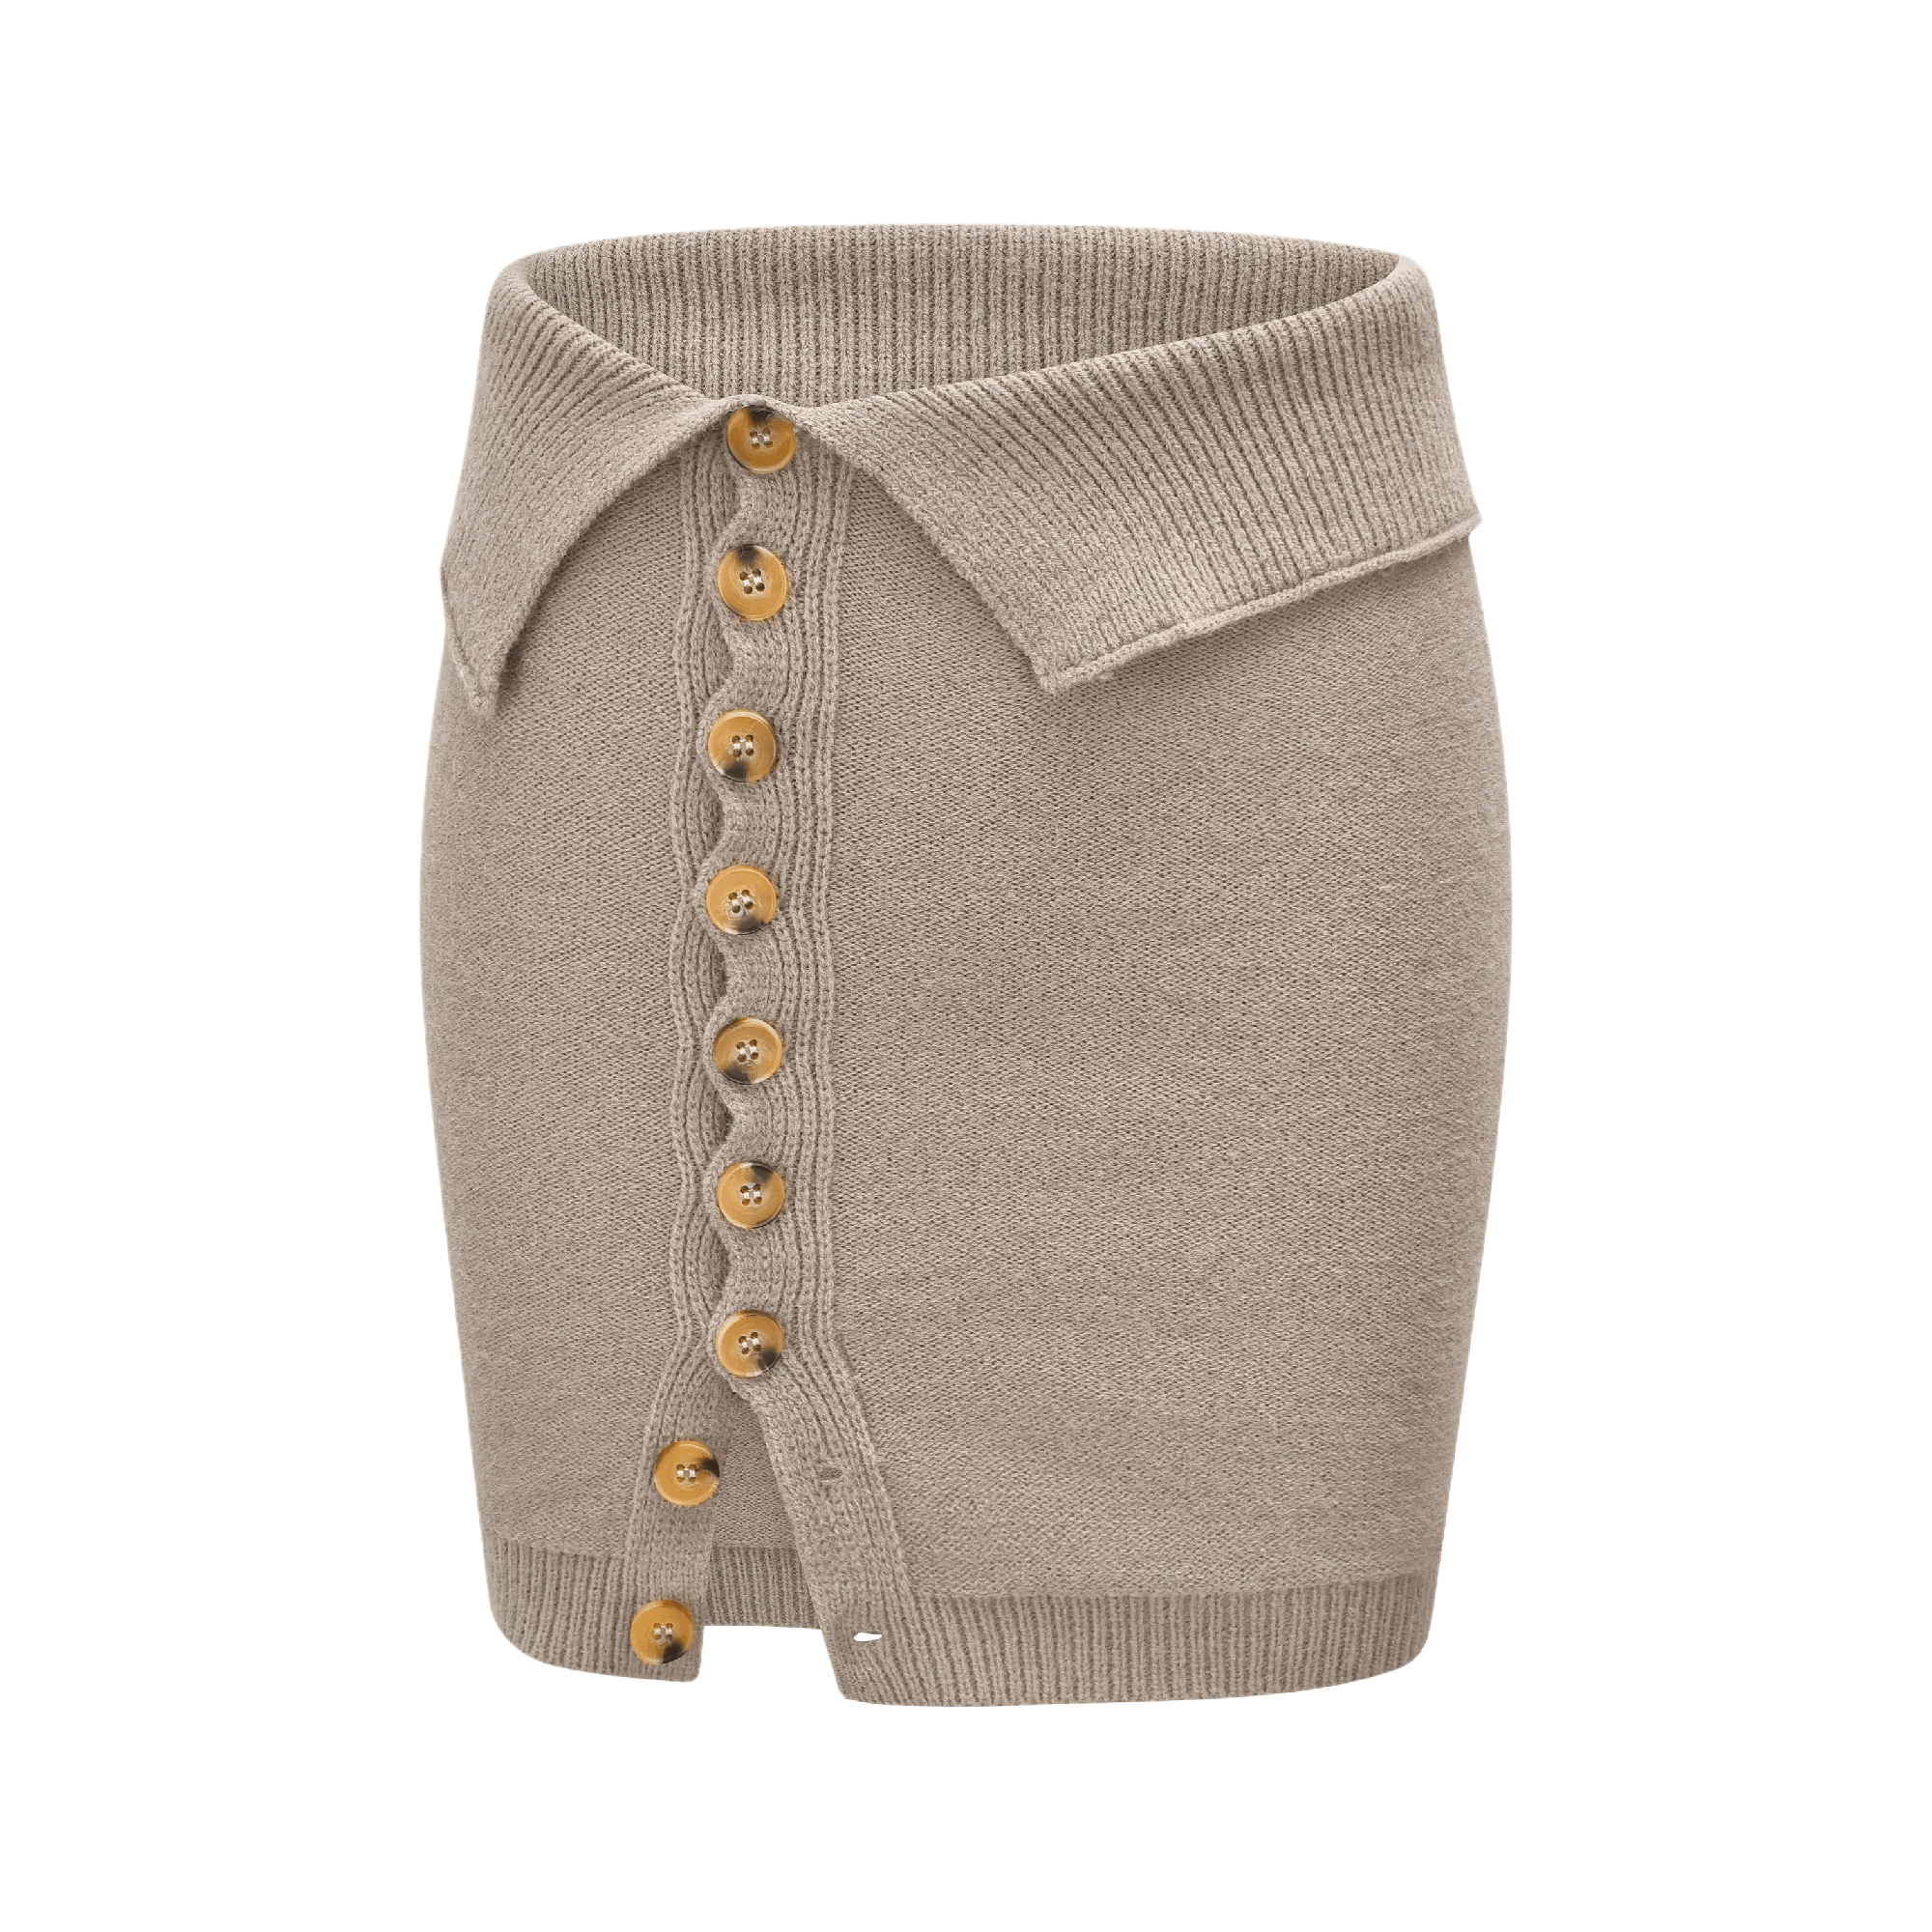 Try Me-structured mini skirt - itsy, it‘z different